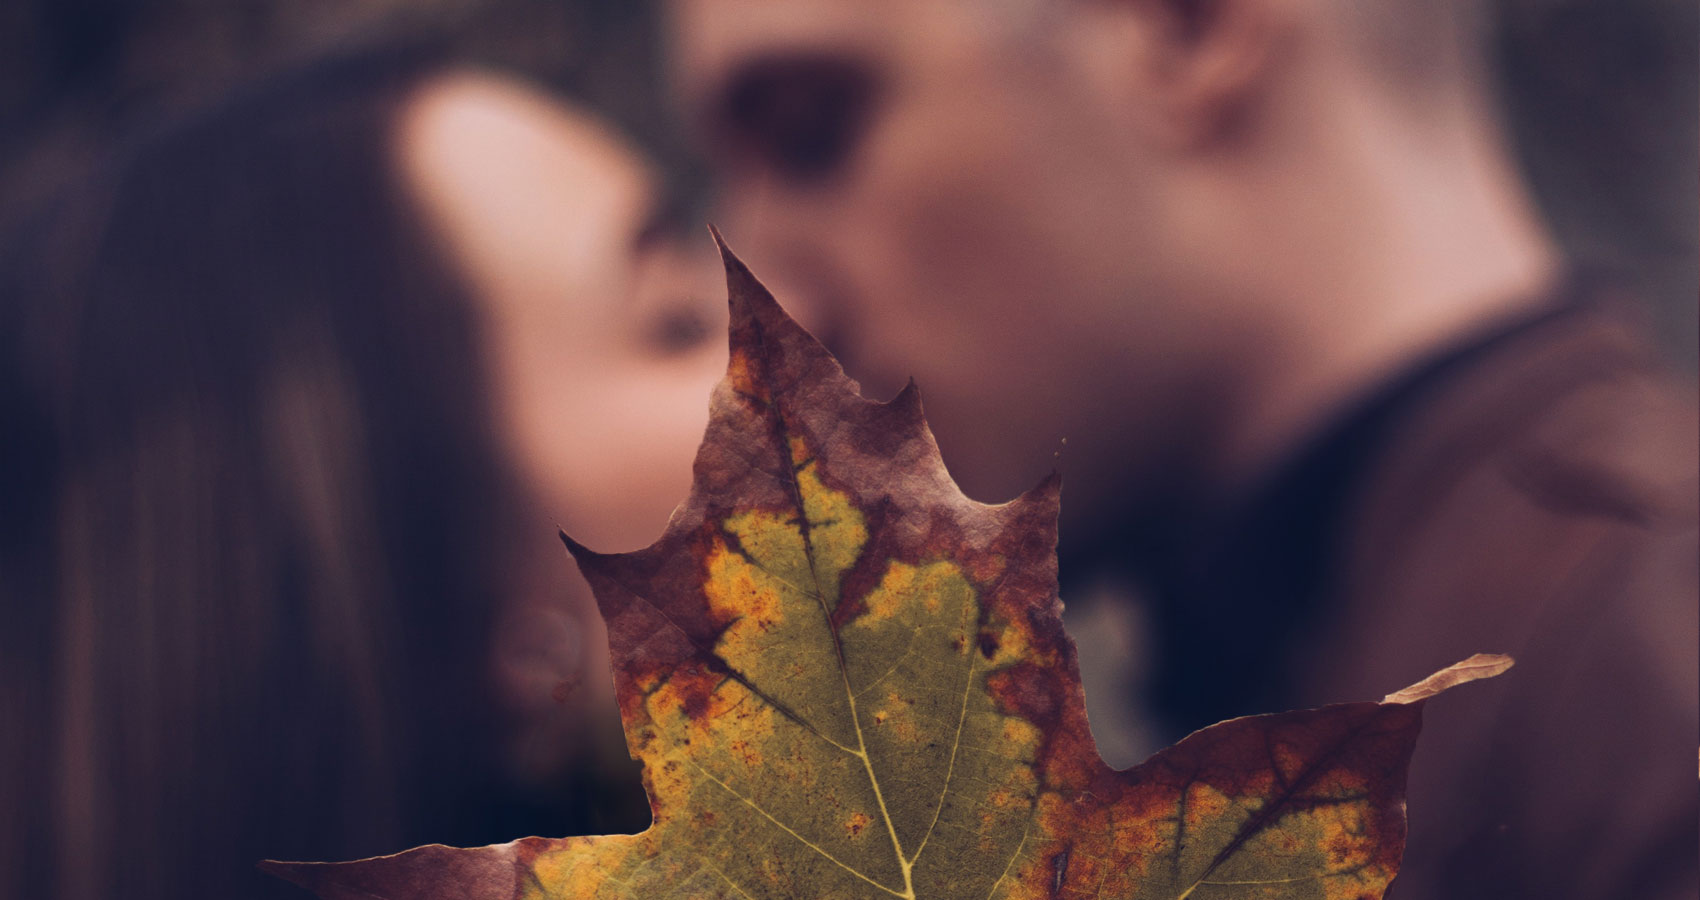 Autumn Love, poetry written by Eddie D. Moore at Spillwords.com